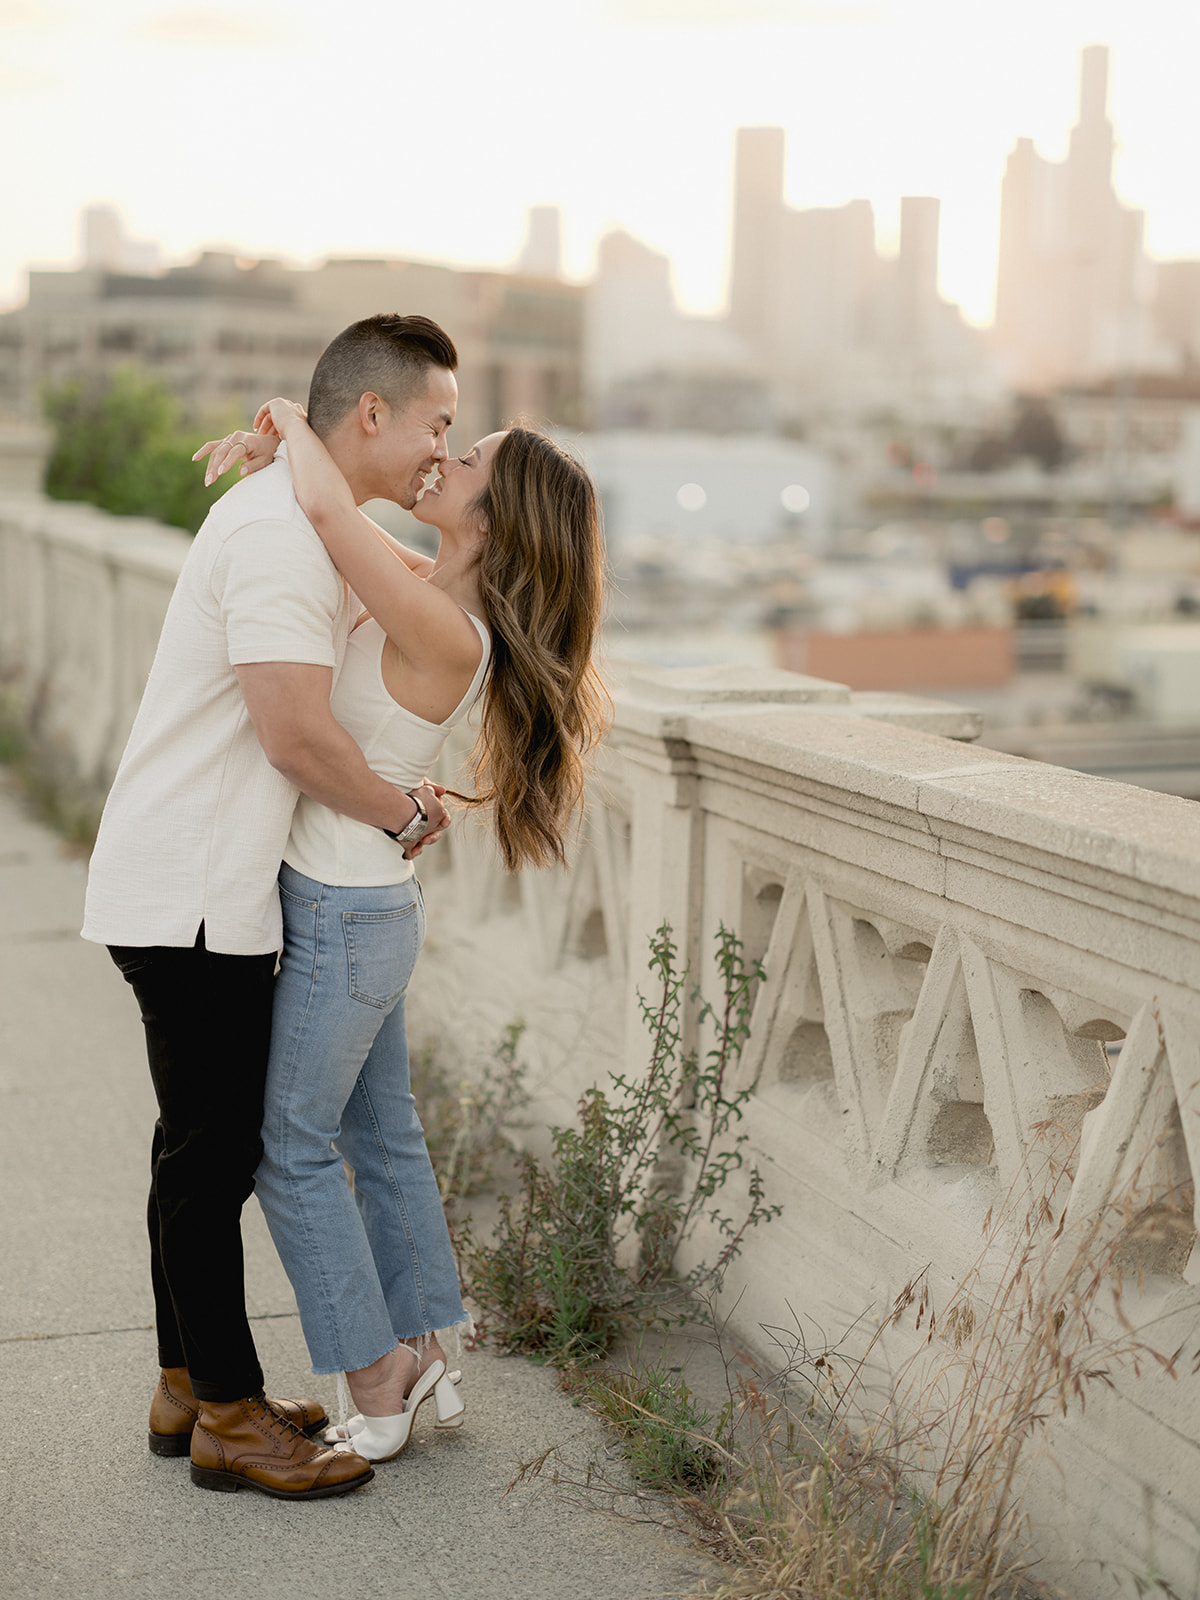 Engaged couple kisses on the 4th street bridge downtown during sunset